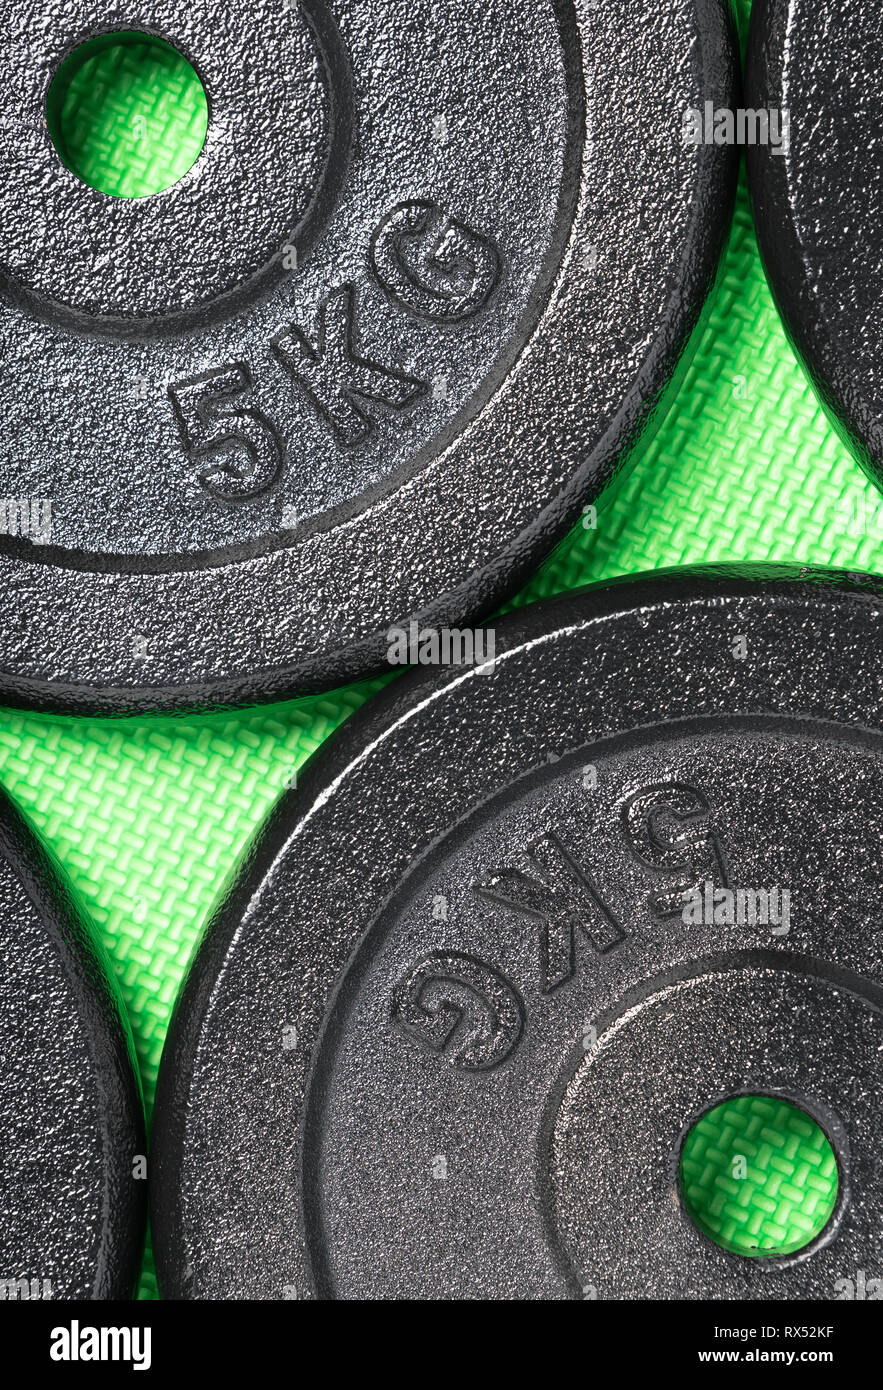 Exercise weight plates on a green floor inside a weight training gym Stock Photo